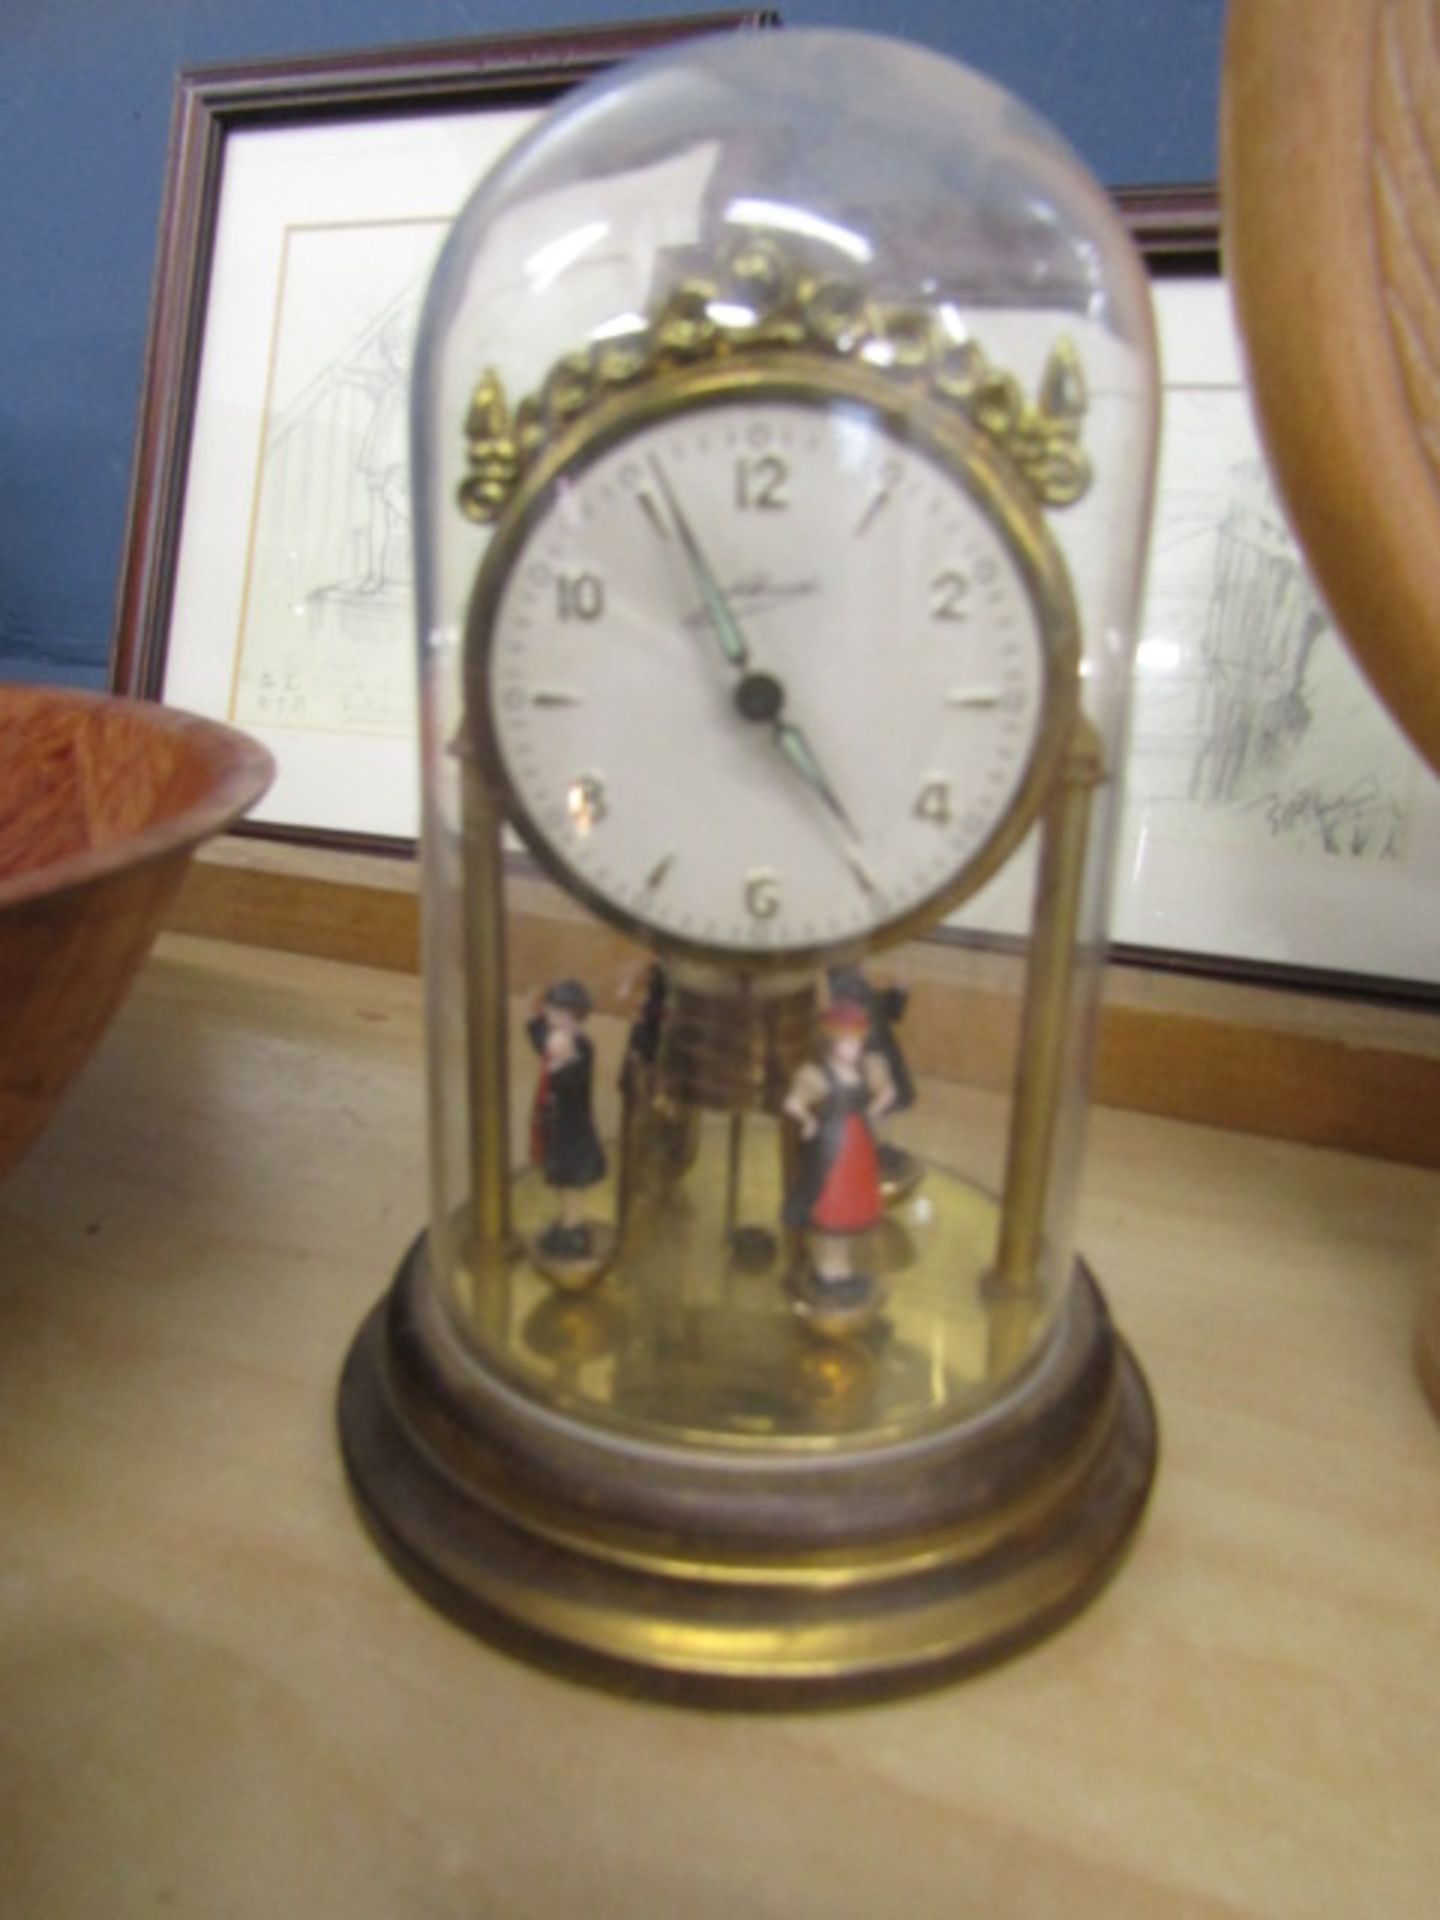 Collectors lot to inc clocks, barometer, tins & buttons, Chinese healing balls etc etc - Image 6 of 8